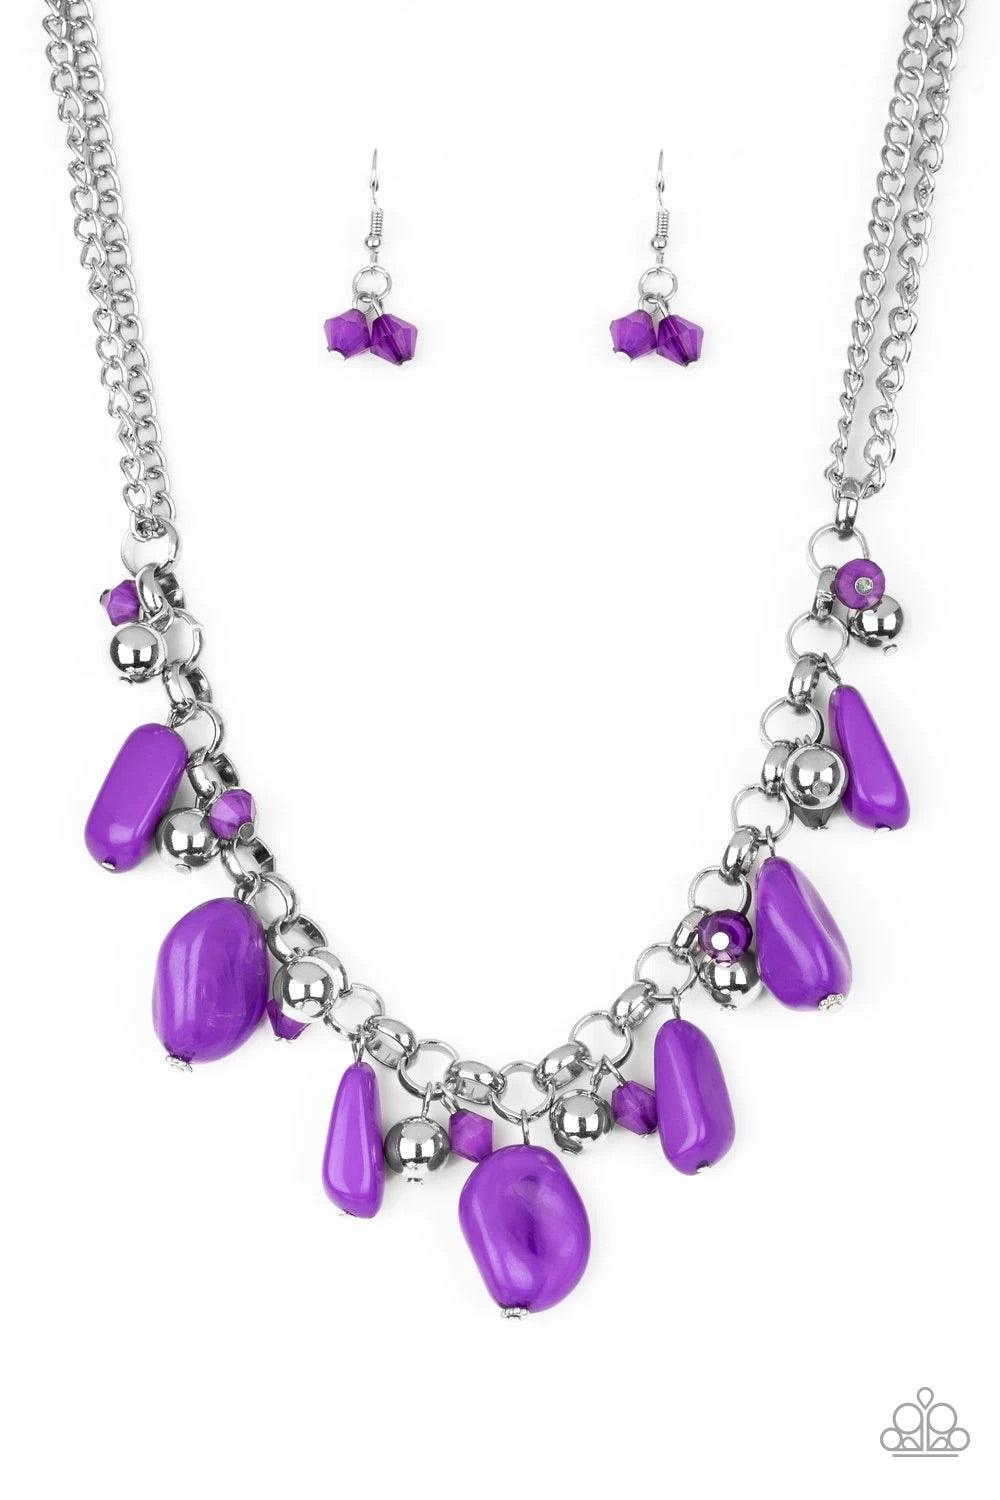 Paparazzi Accessories Grand Canyon - Purple Featuring polished and cloudy finishes, a collection of purple faux rocks dance from the bottom of a bold silver chain. Classic silver beads trickle between the colorful beading, adding a metallic shimmer to the